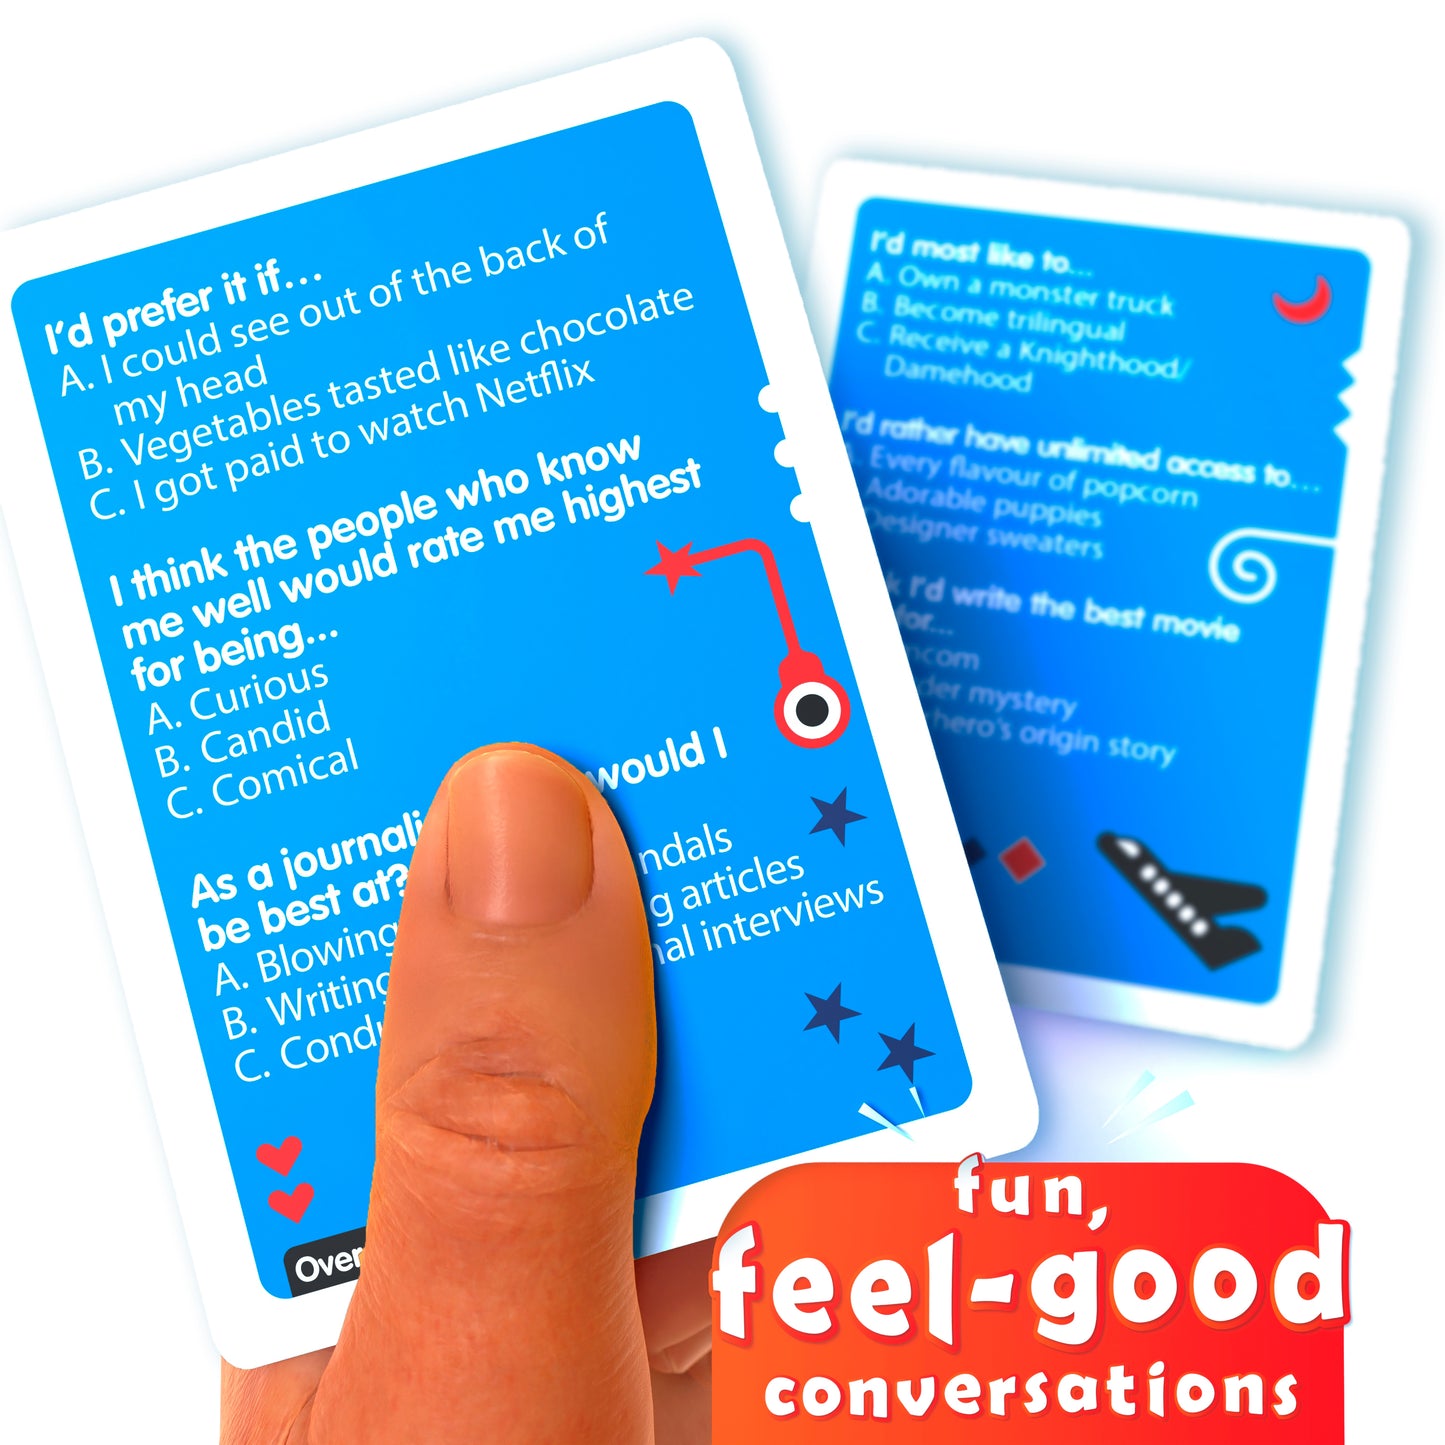 COOL BLUE: The Wacky Guess Your Answer Card Game